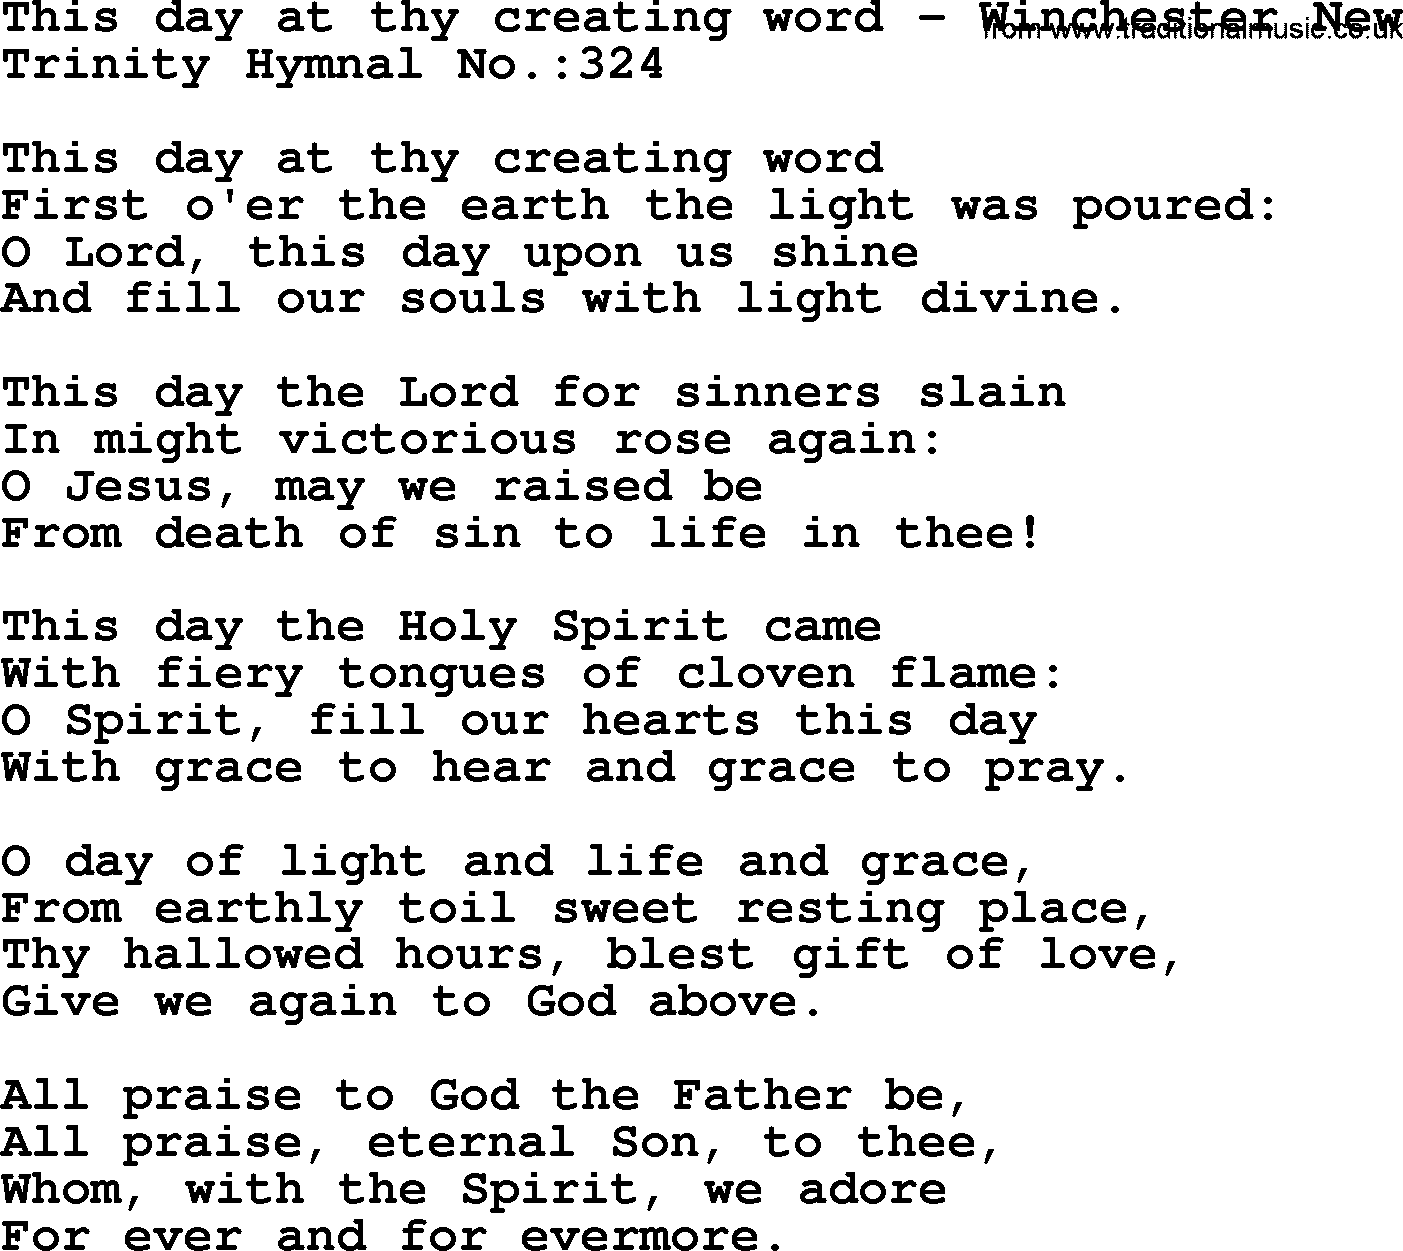 Trinity Hymnal Hymn: This Day At Thy Creating Word--Winchester New, lyrics with midi music